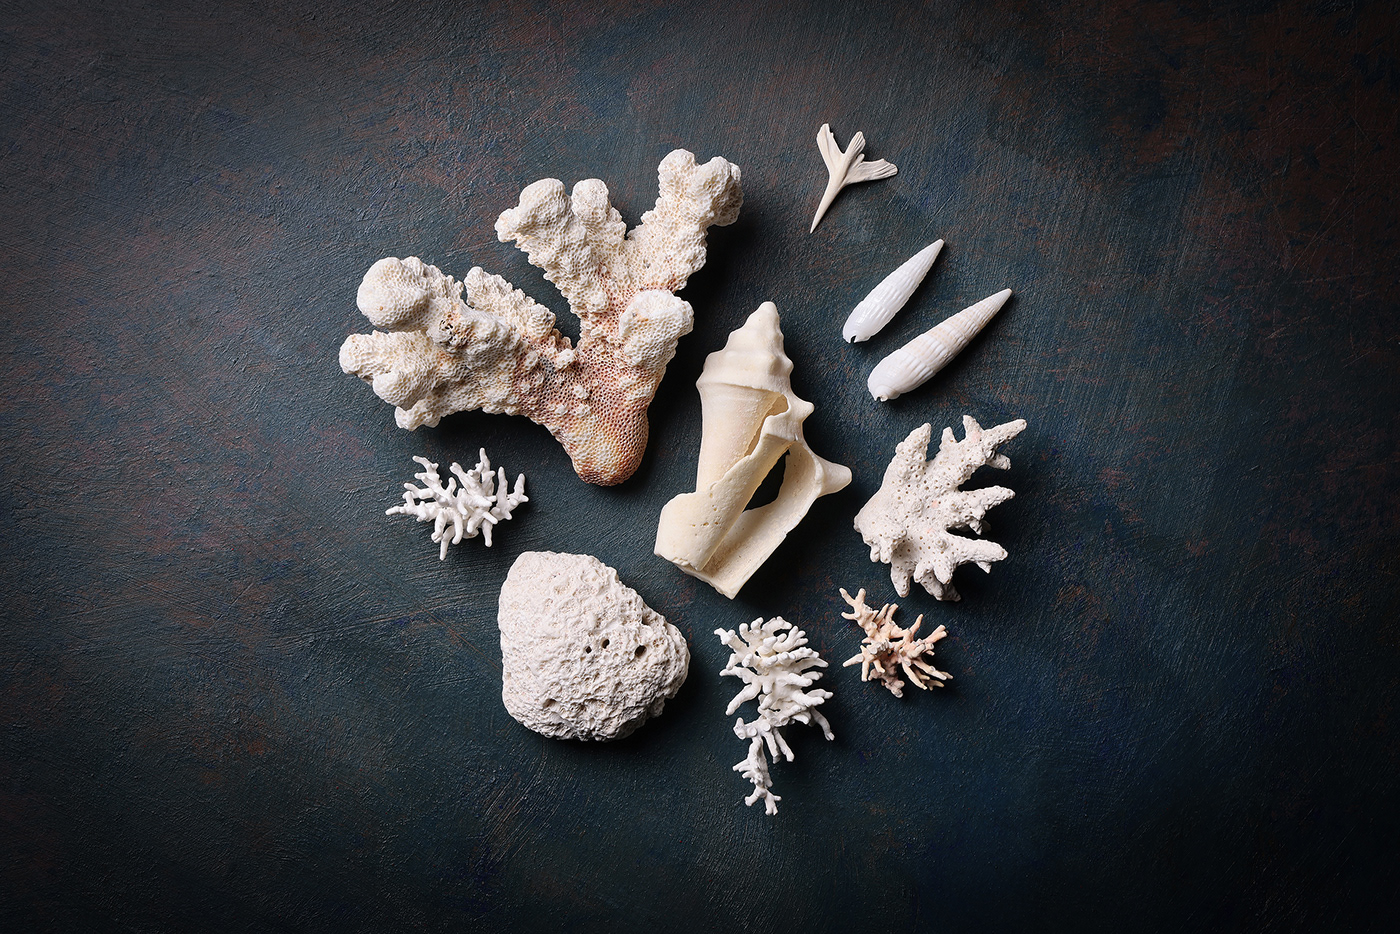 Collection composition corals Nature reef sea shells still life still life photography underwater